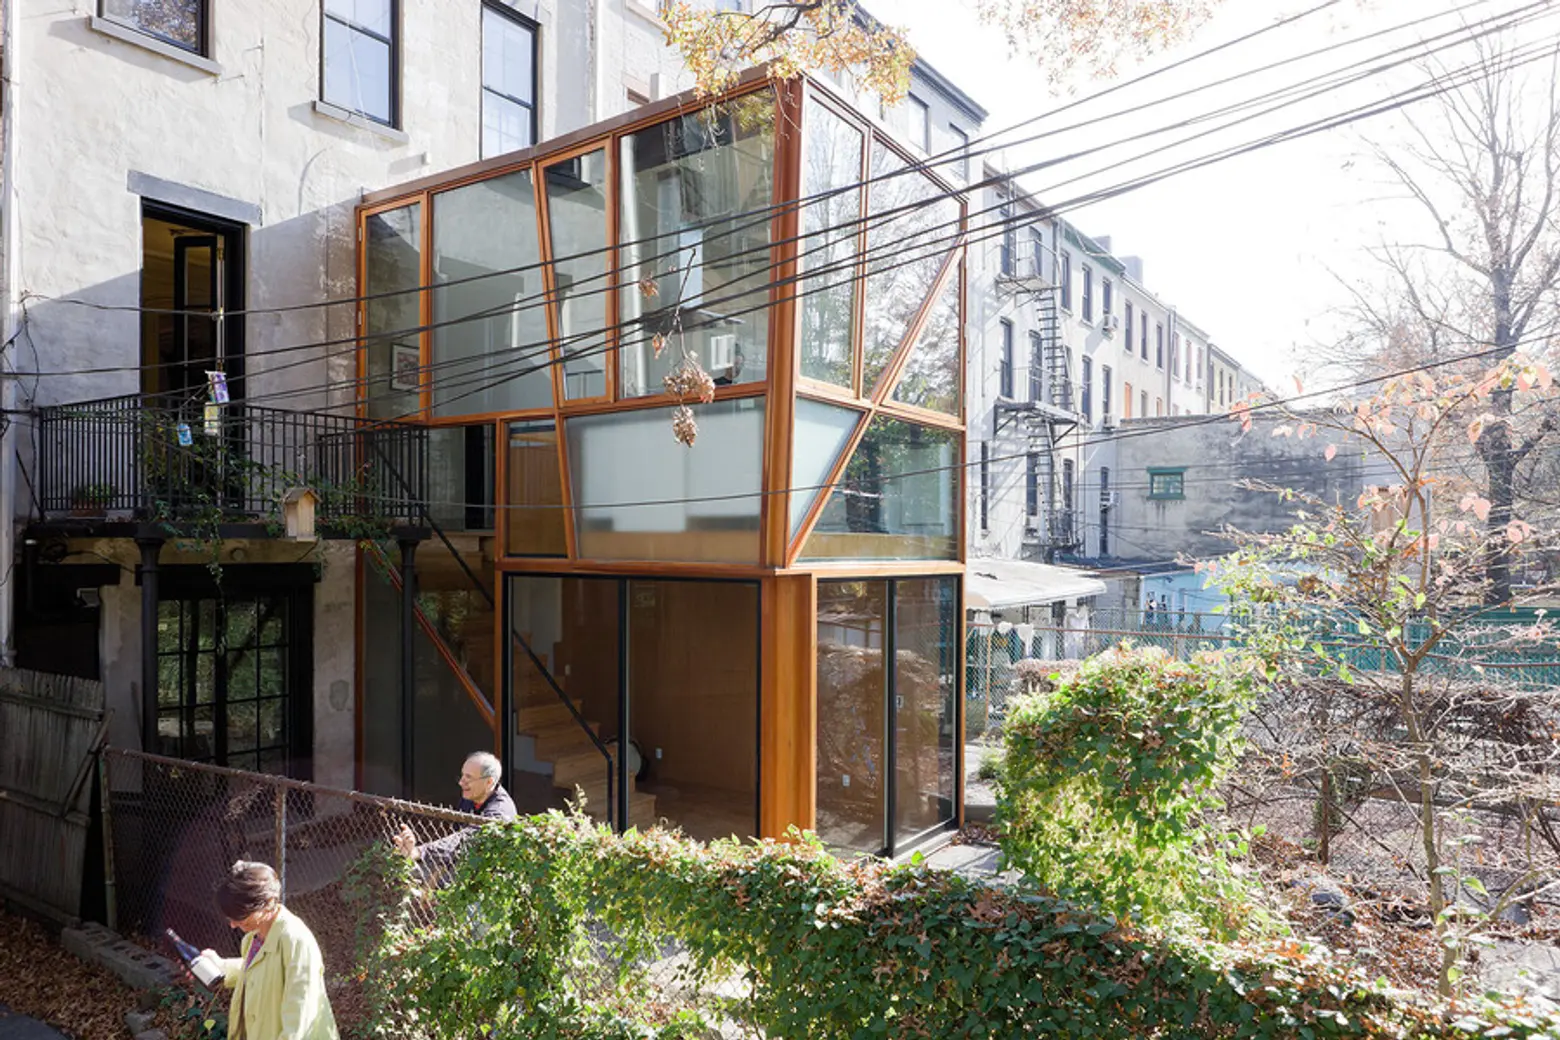 Brooklyn Family Expands Fort Greene Townhouse with Airy Garden Pavilion by O’Neill McVoy Architects